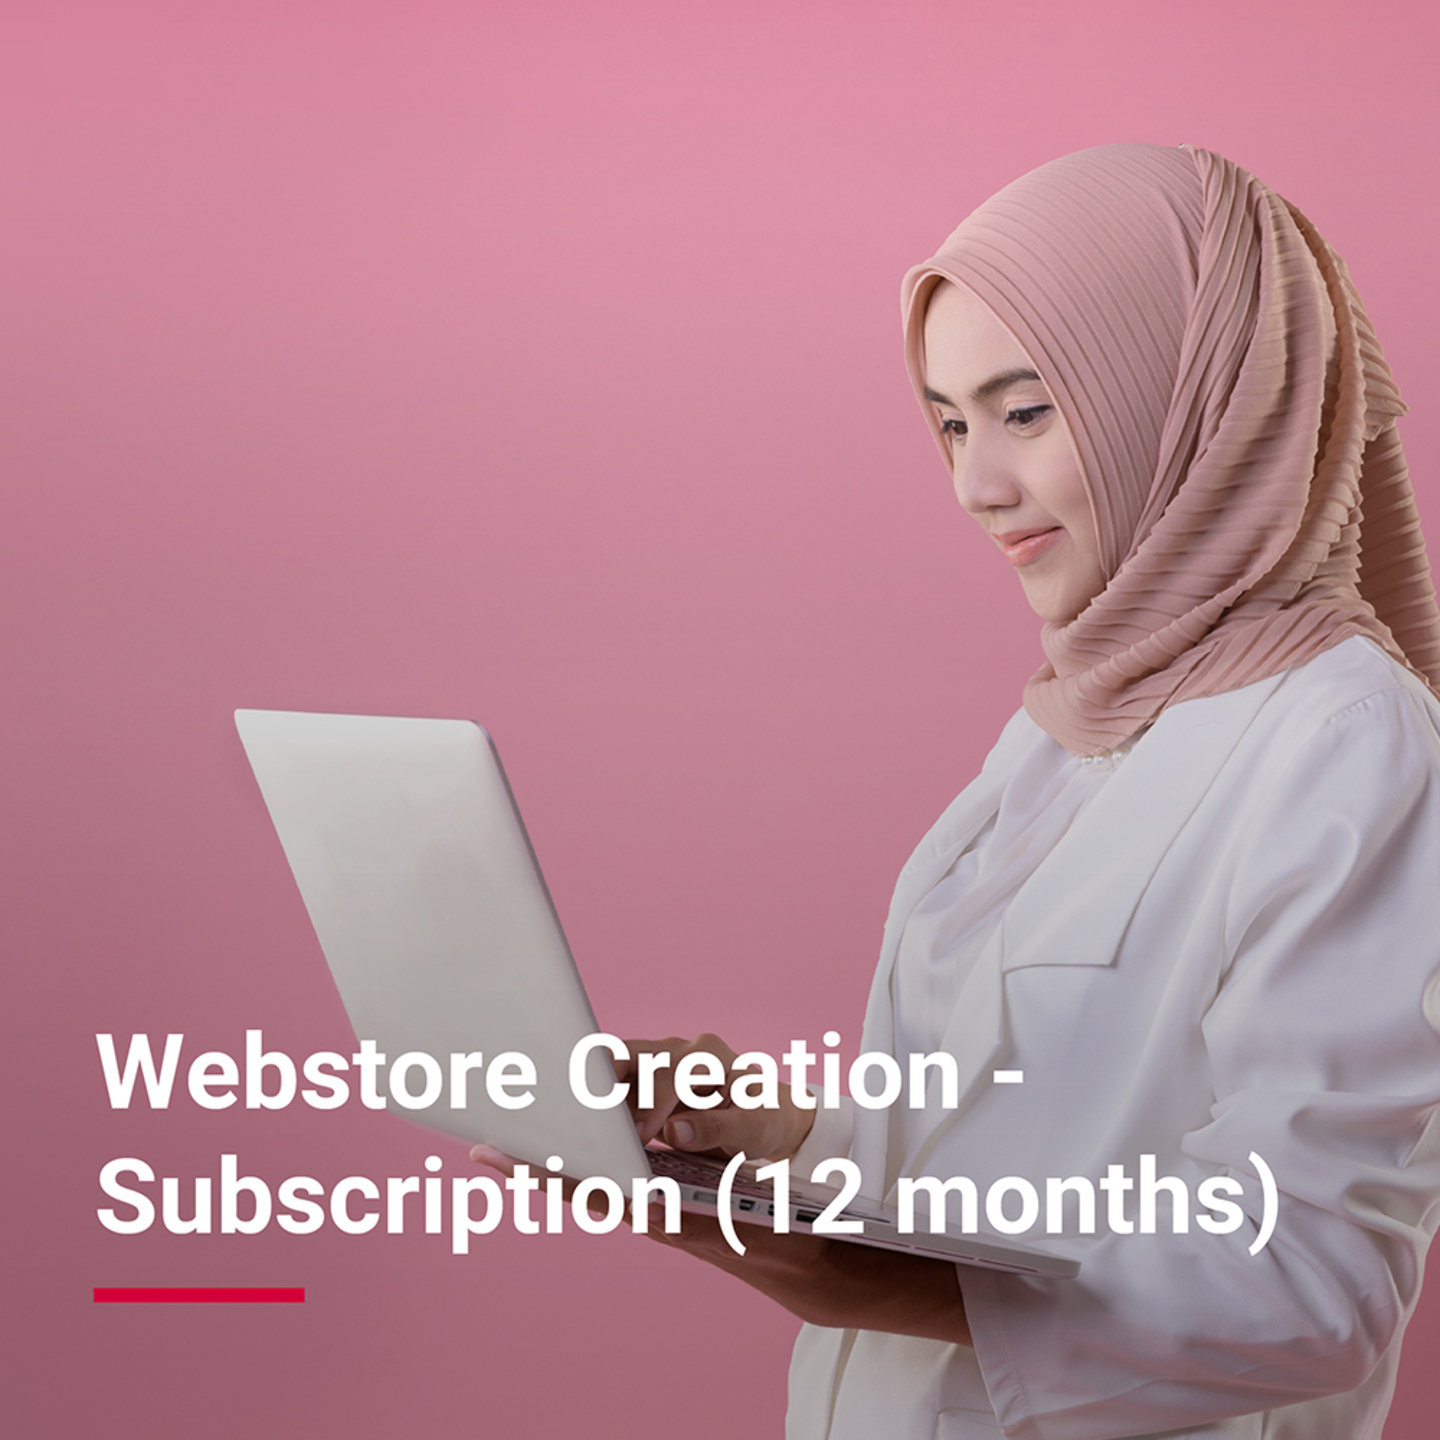 Webstore Creation - Subscription (12 months)